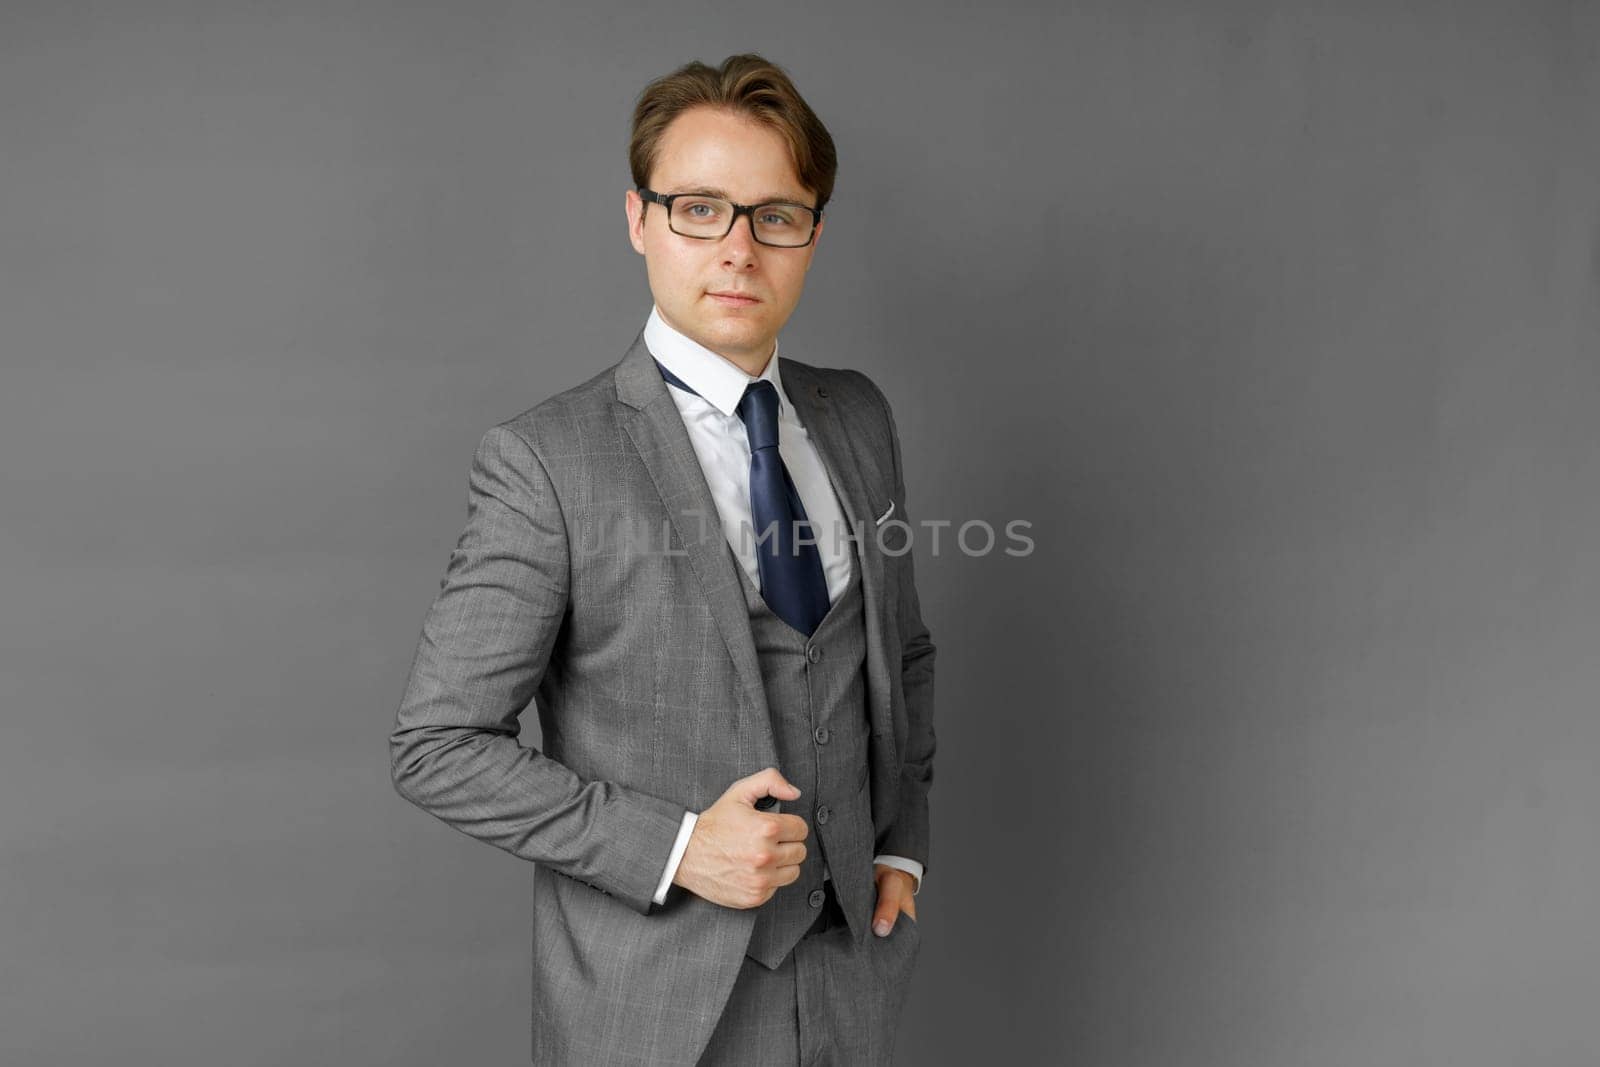 Portrait of a businessman in a suit looking at the camera. Gray background. by Sd28DimoN_1976